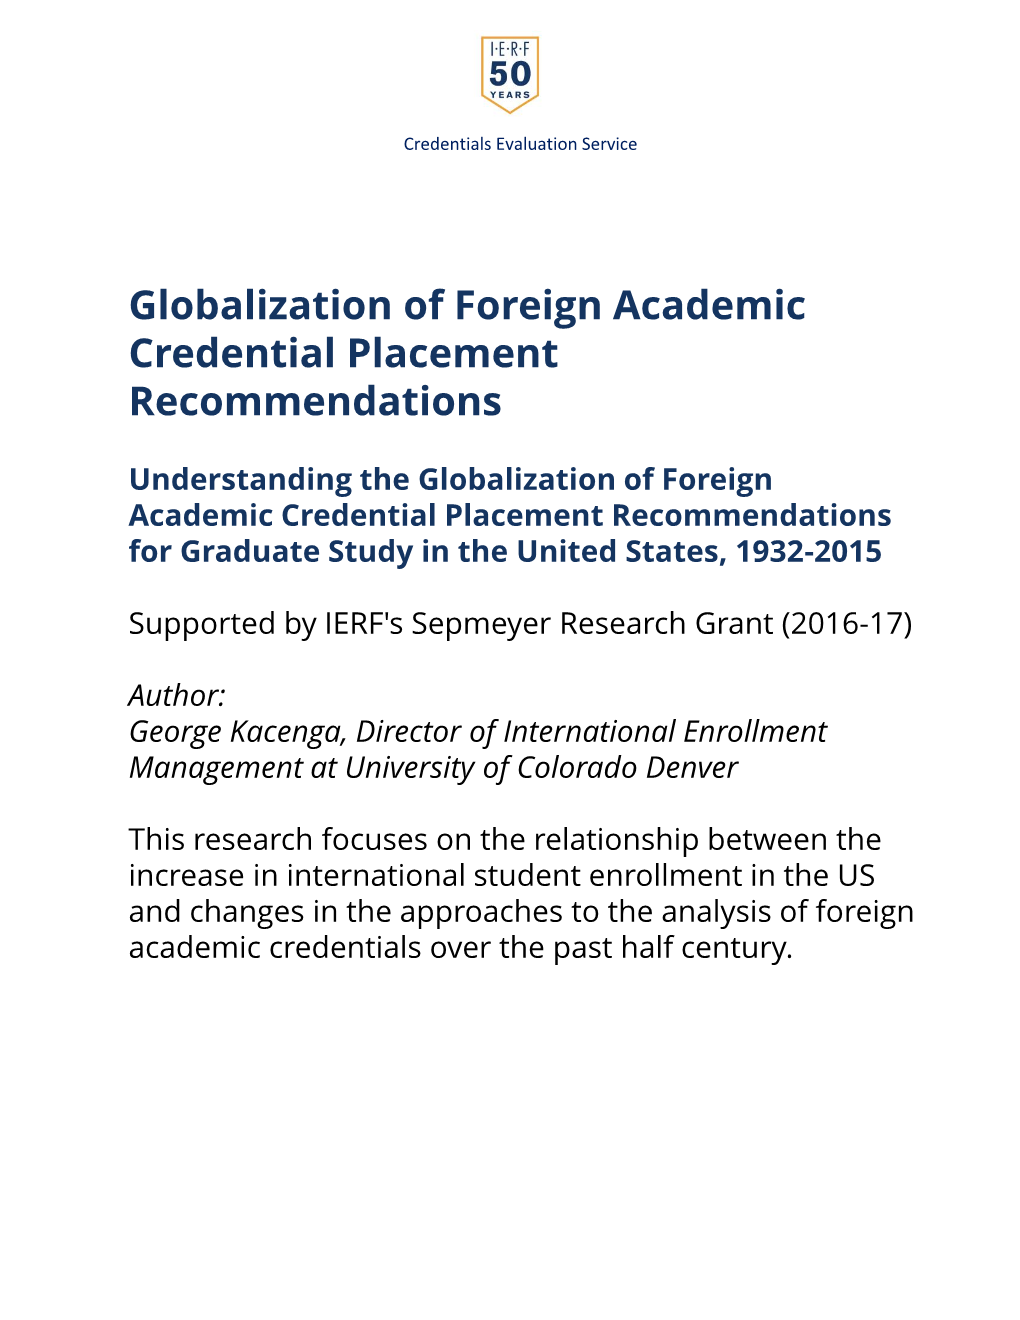 Globalization of Foreign Academic Credential Placement Recommendations